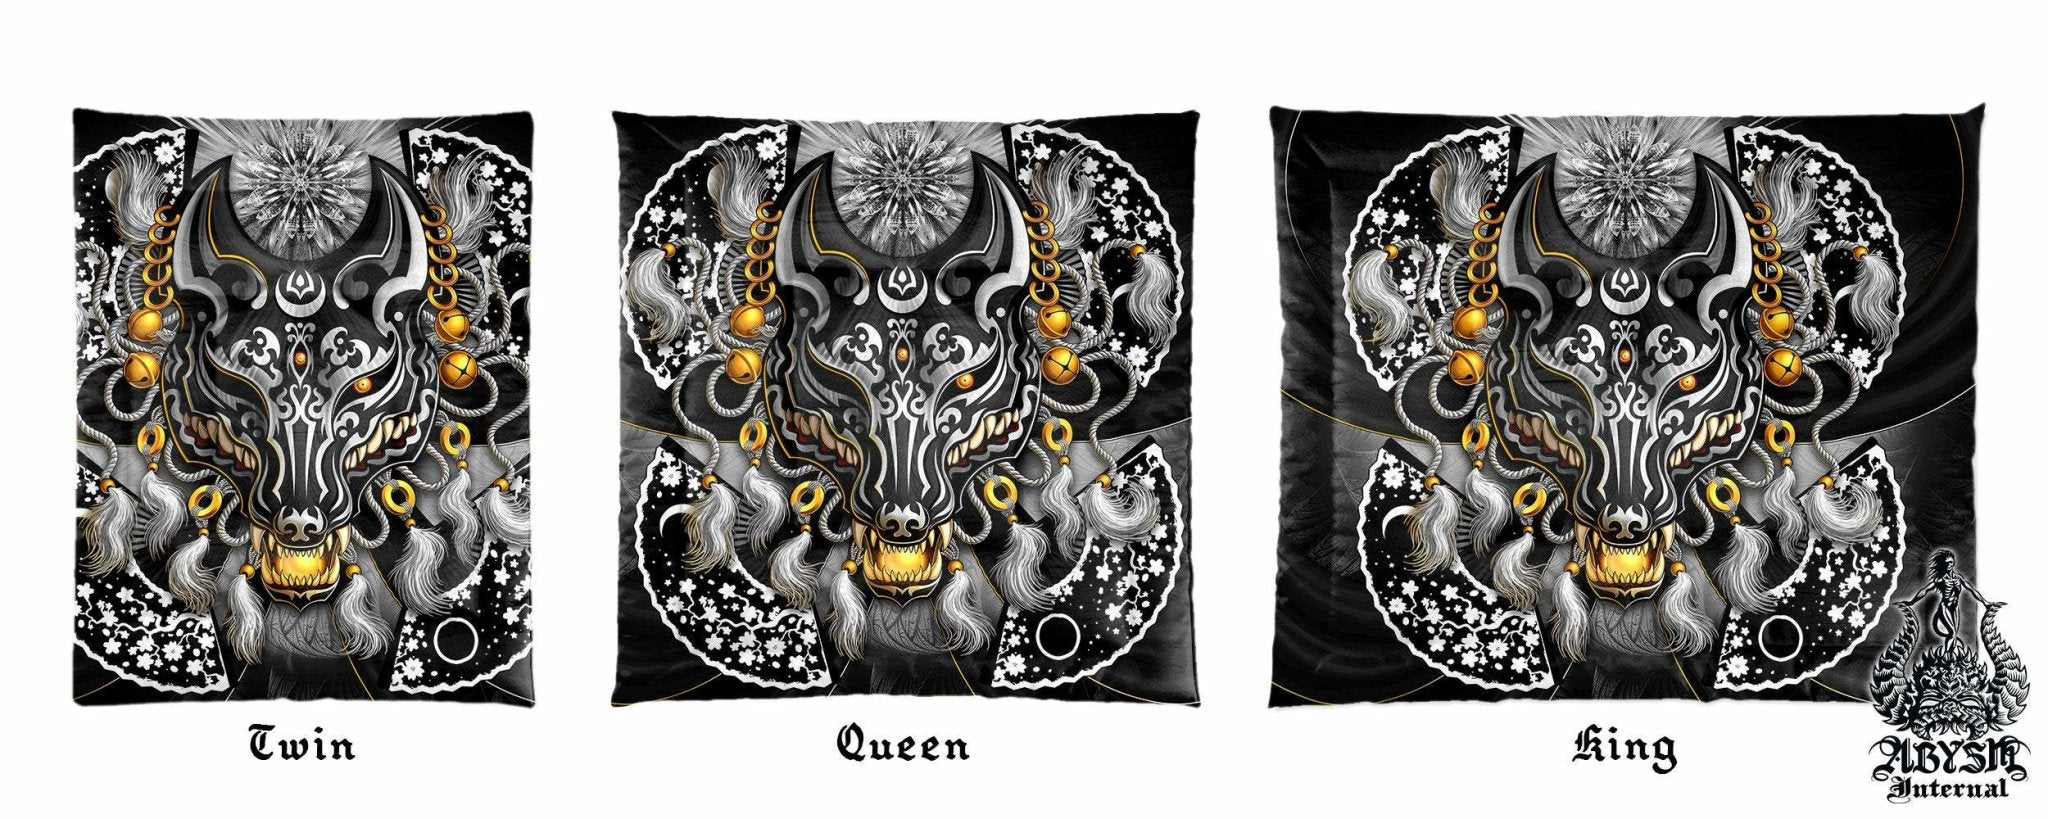 Kitsune Mask Bedding Set, Comforter and Duvet, Gamer Bed Cover and Bedroom Decor, Fox Okami, Anime Art, King, Queen and Twin Size - Black and White I - Abysm Internal